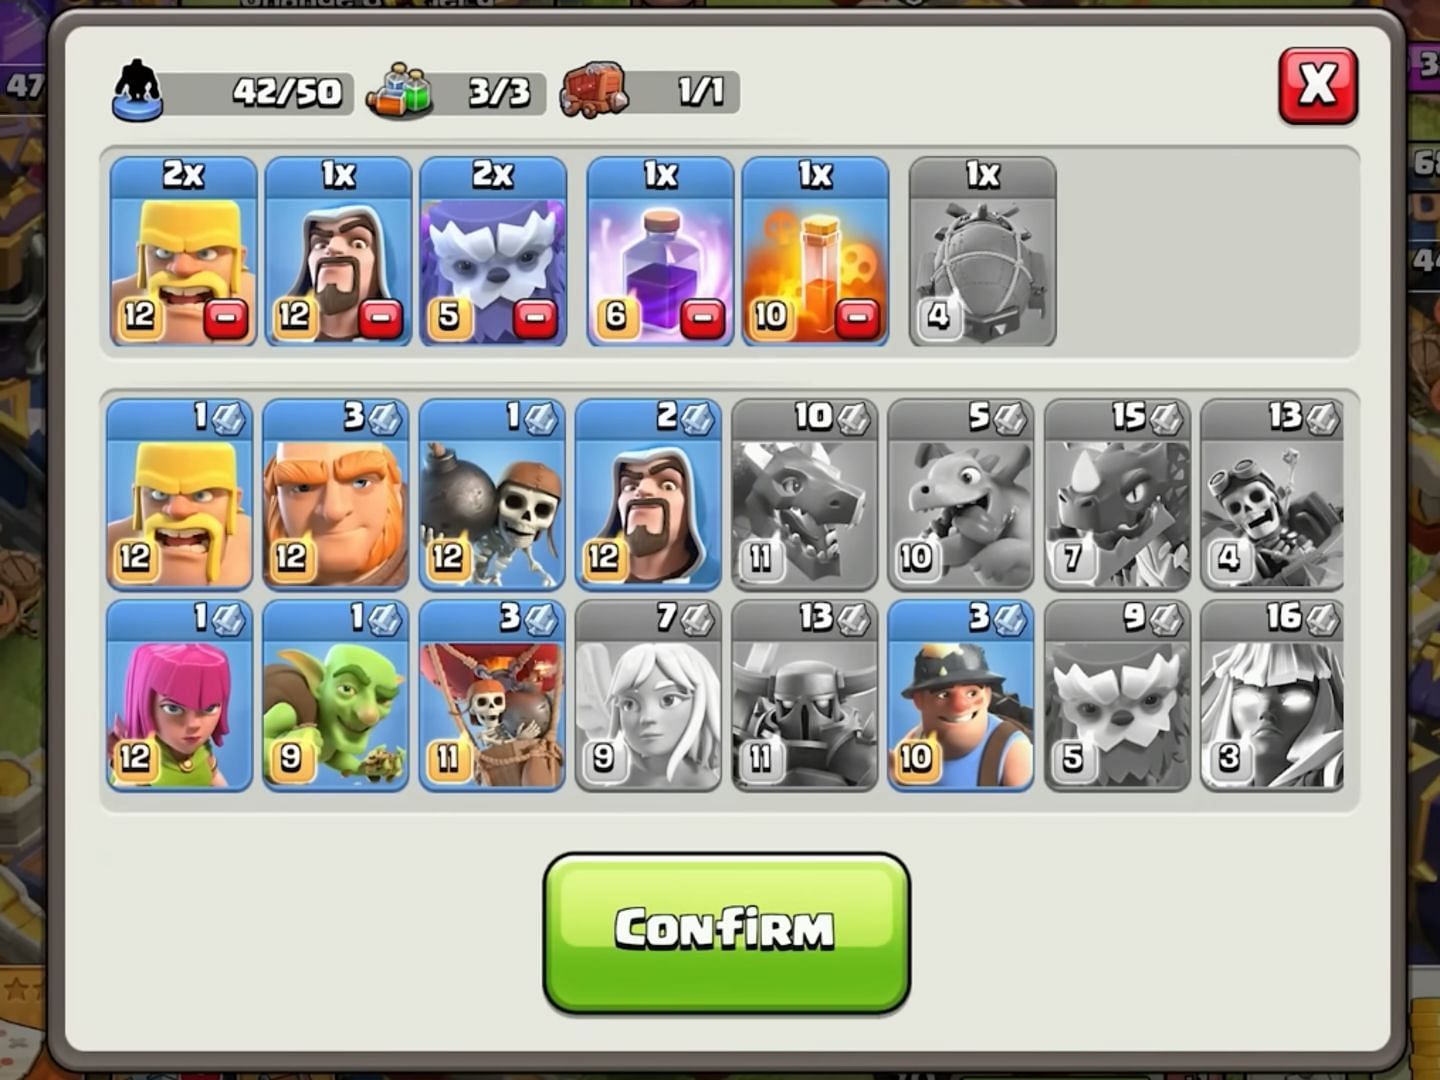 Army selection (Image via Supercell // Judo Sloth Gaming/YouTube)